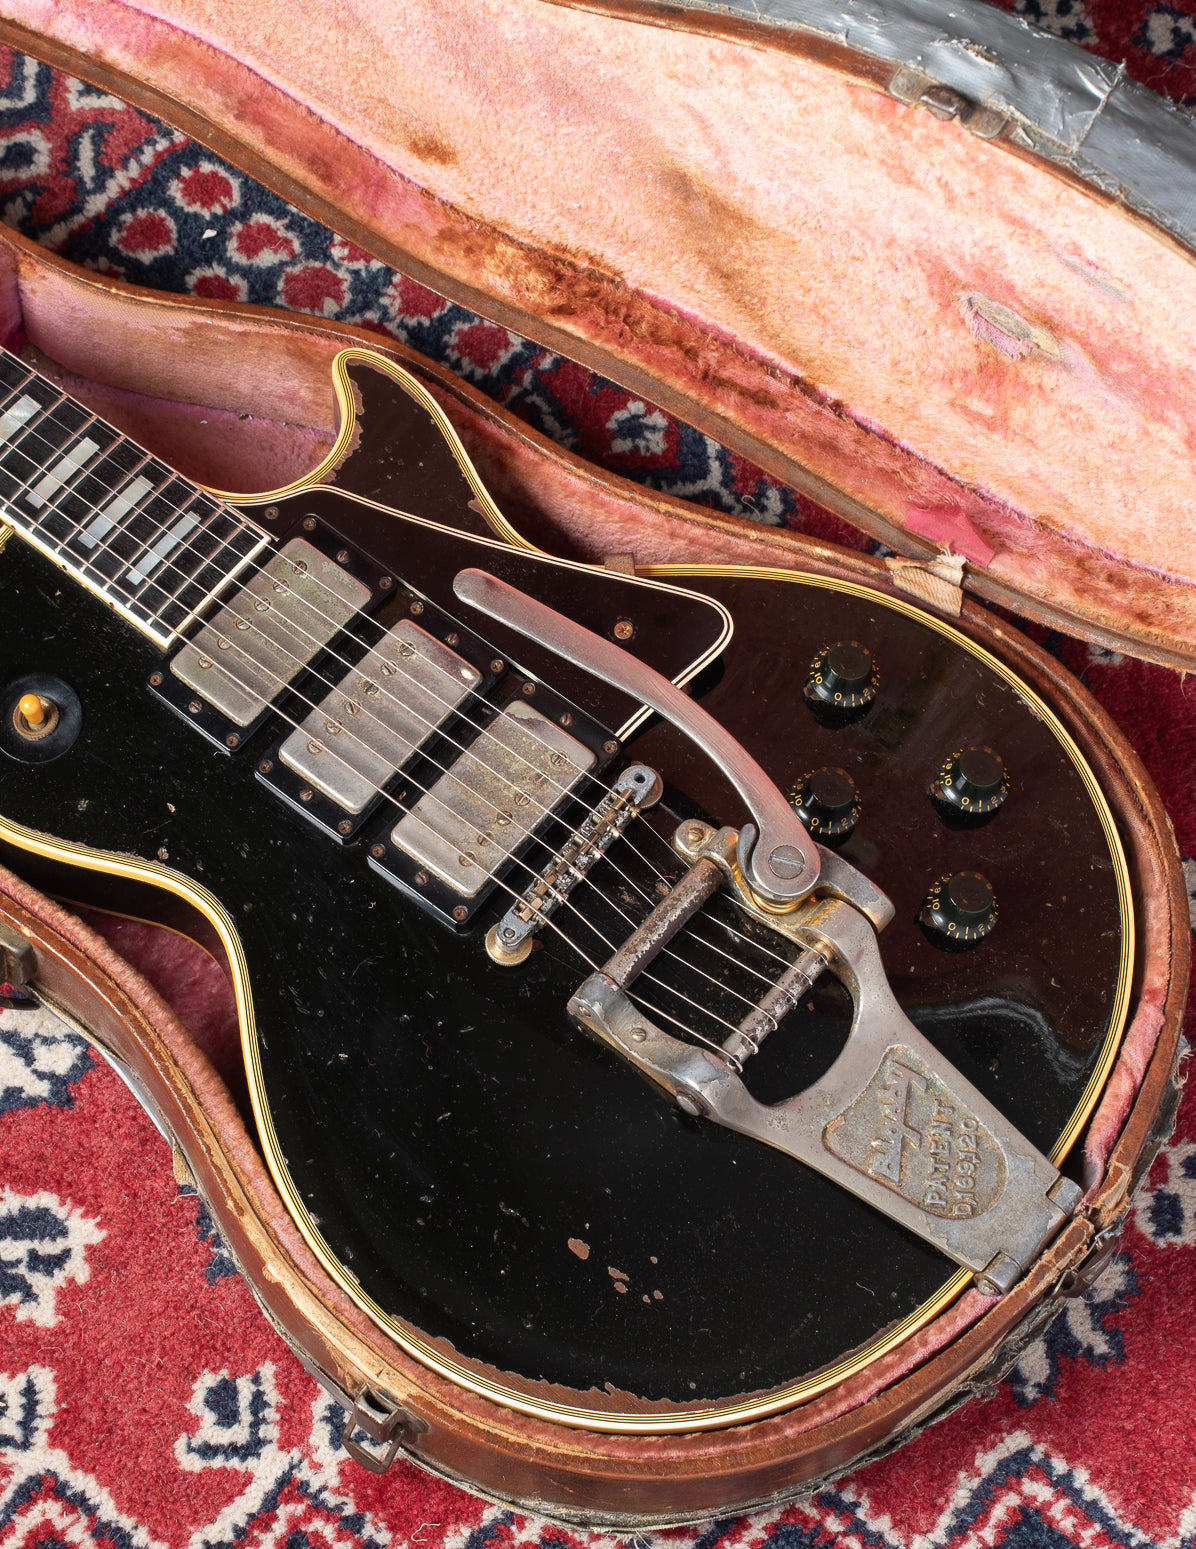 1960 Gibson Les Paul Custom black in pink and brown case